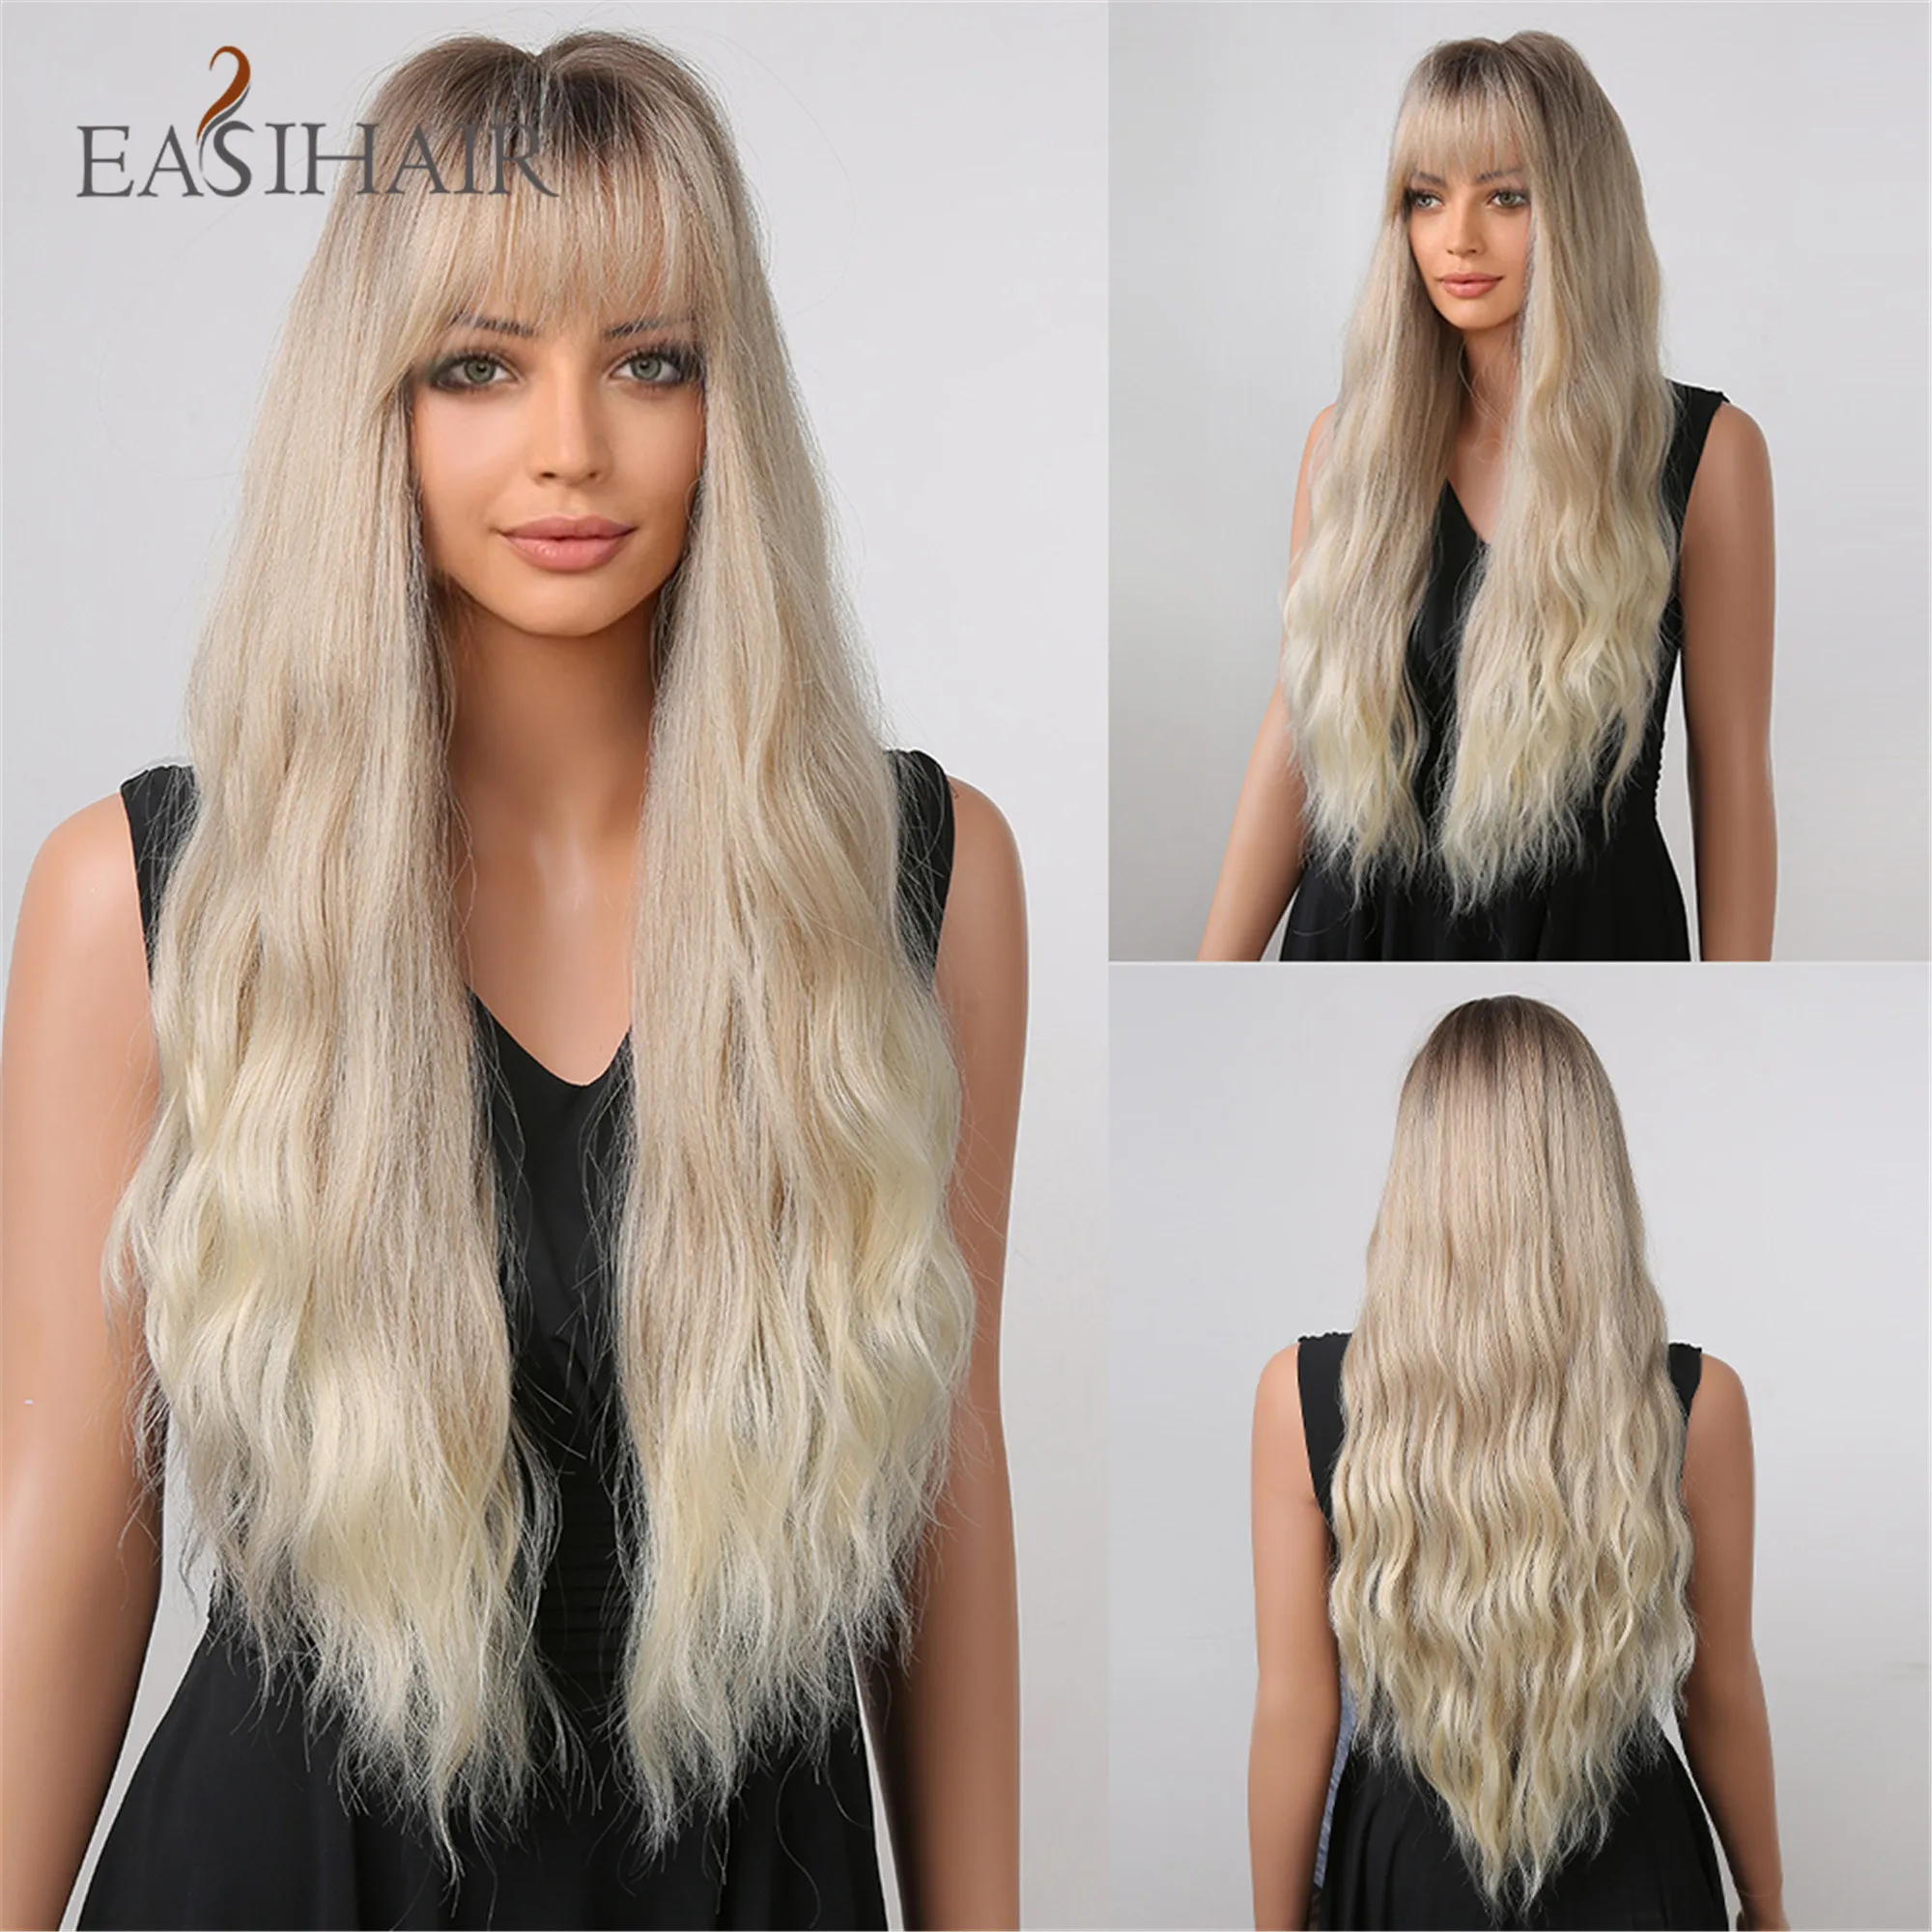 

EASIHAIR Long Wavy Wigs with Bang Platinum Blonde Synthetic Wigs for Black Women Daily Heat Resistant Fibers Wig with Dark Root